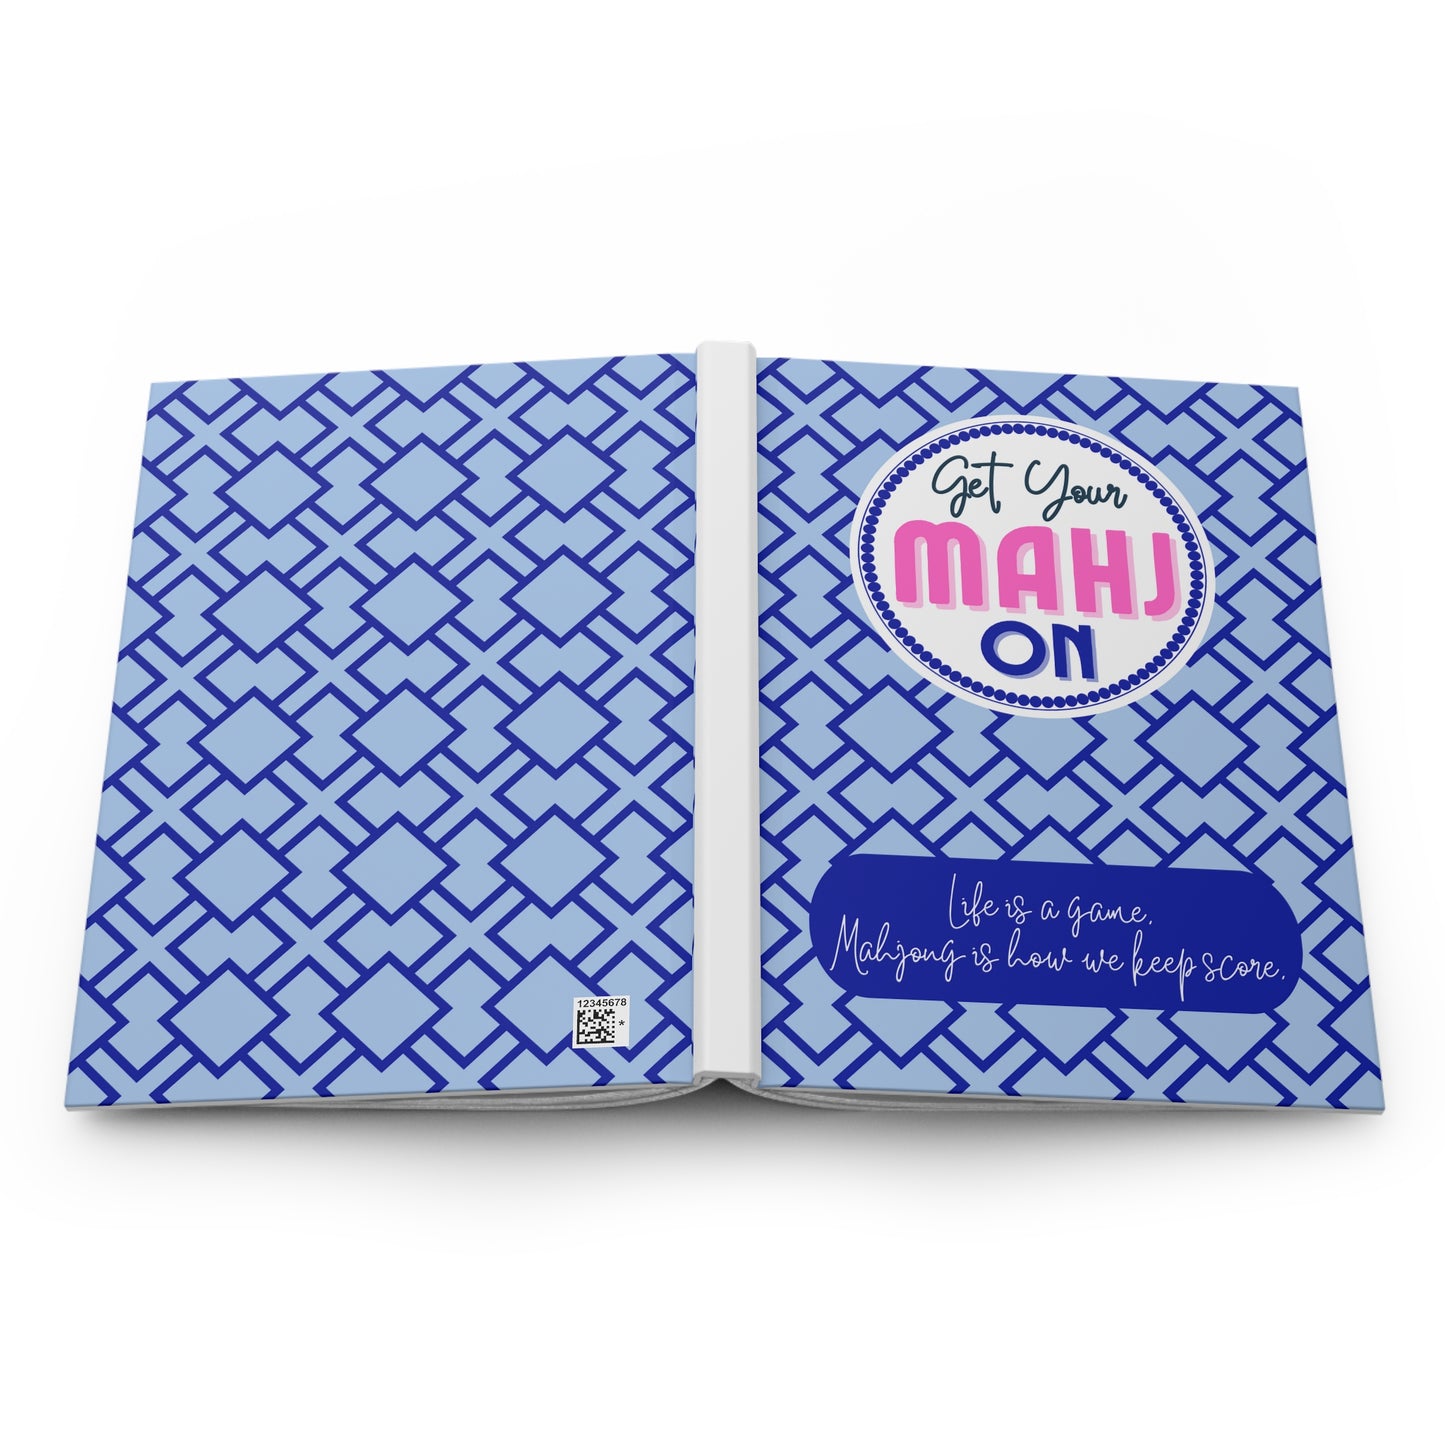 Mahjong Score Notebook, Blue- Mah-jongg journal to note memories and scores through time. Great gift!